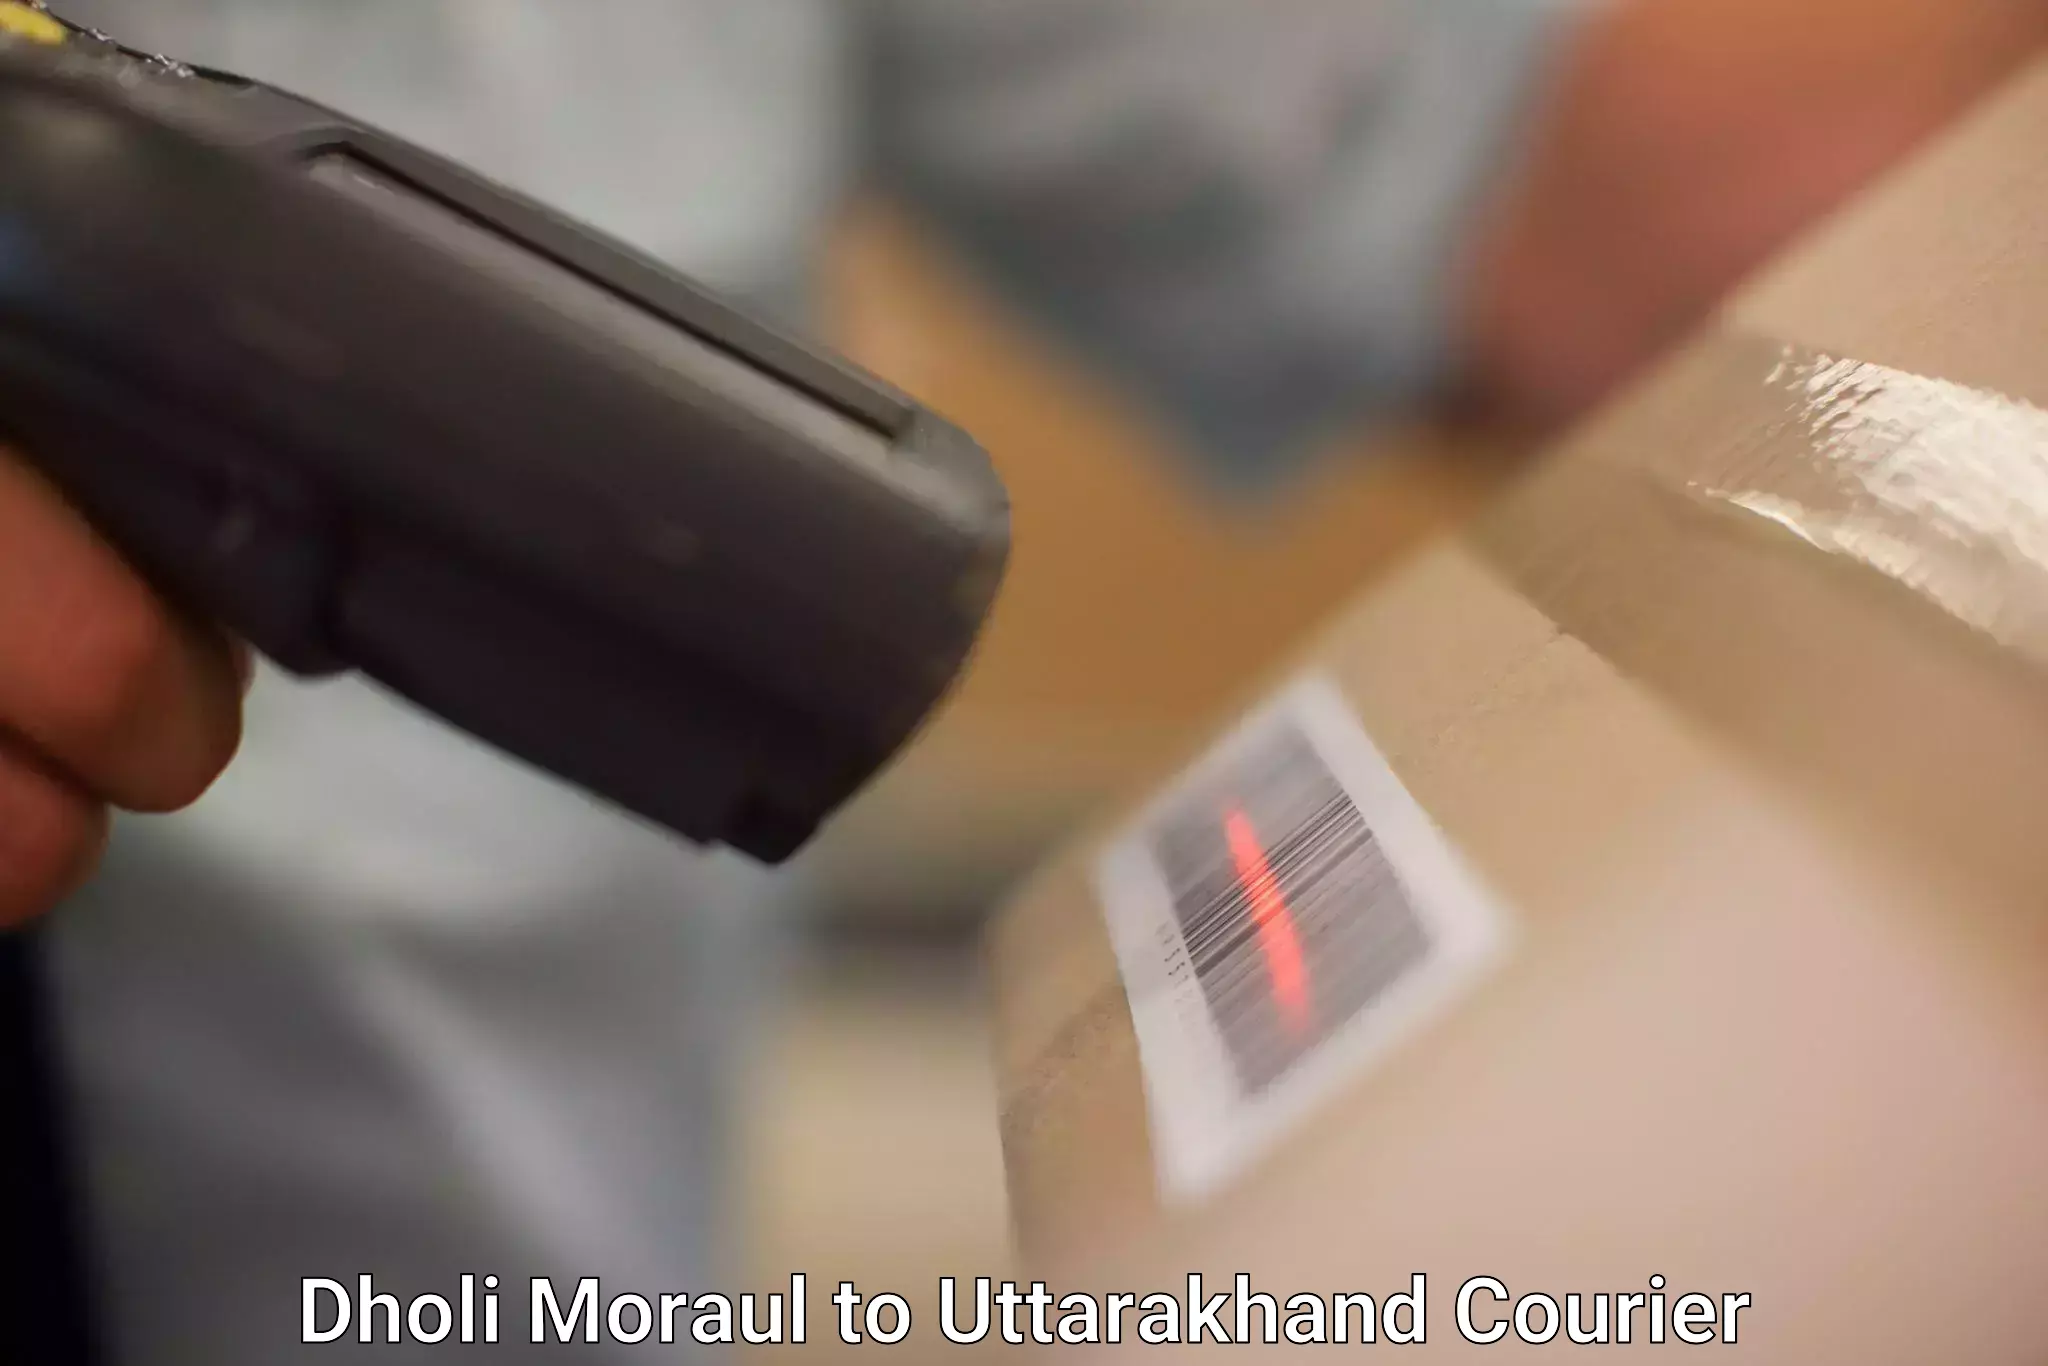 24/7 shipping services Dholi Moraul to IIT Roorkee